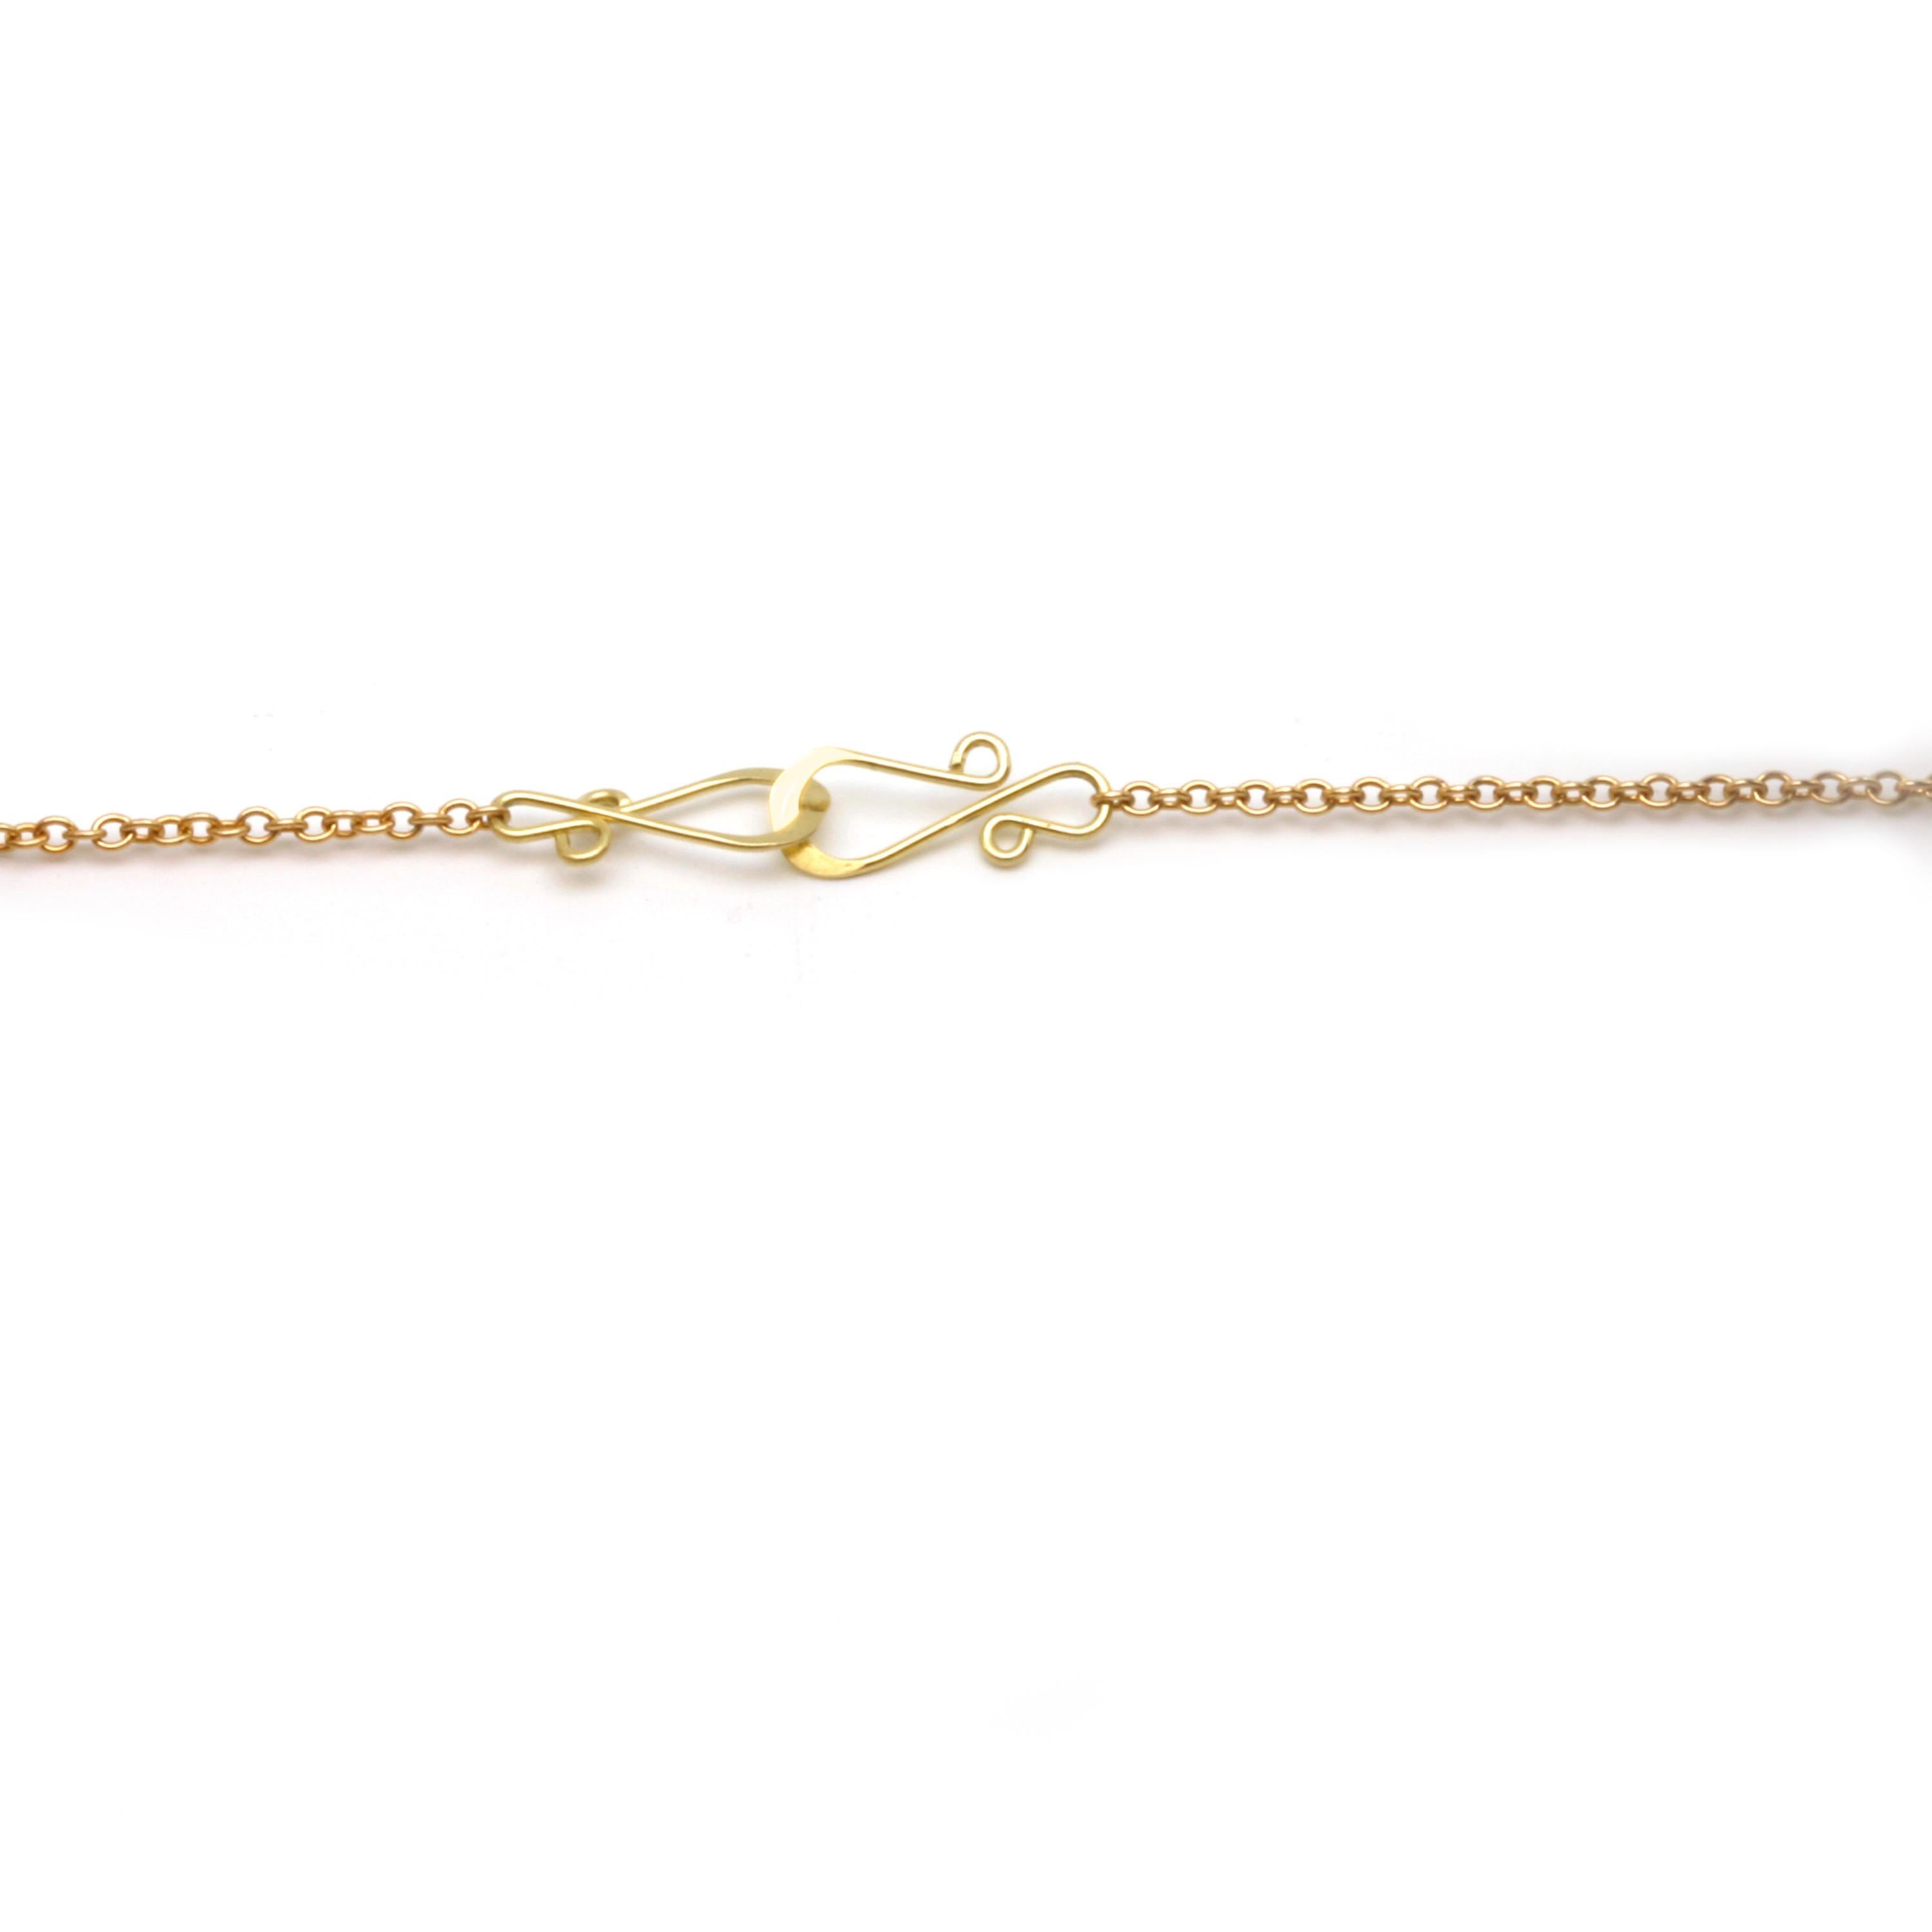 Artisan Diana Kim England Seastar Necklace with Pink Sapphire Faceted Beads in 18k Gold For Sale